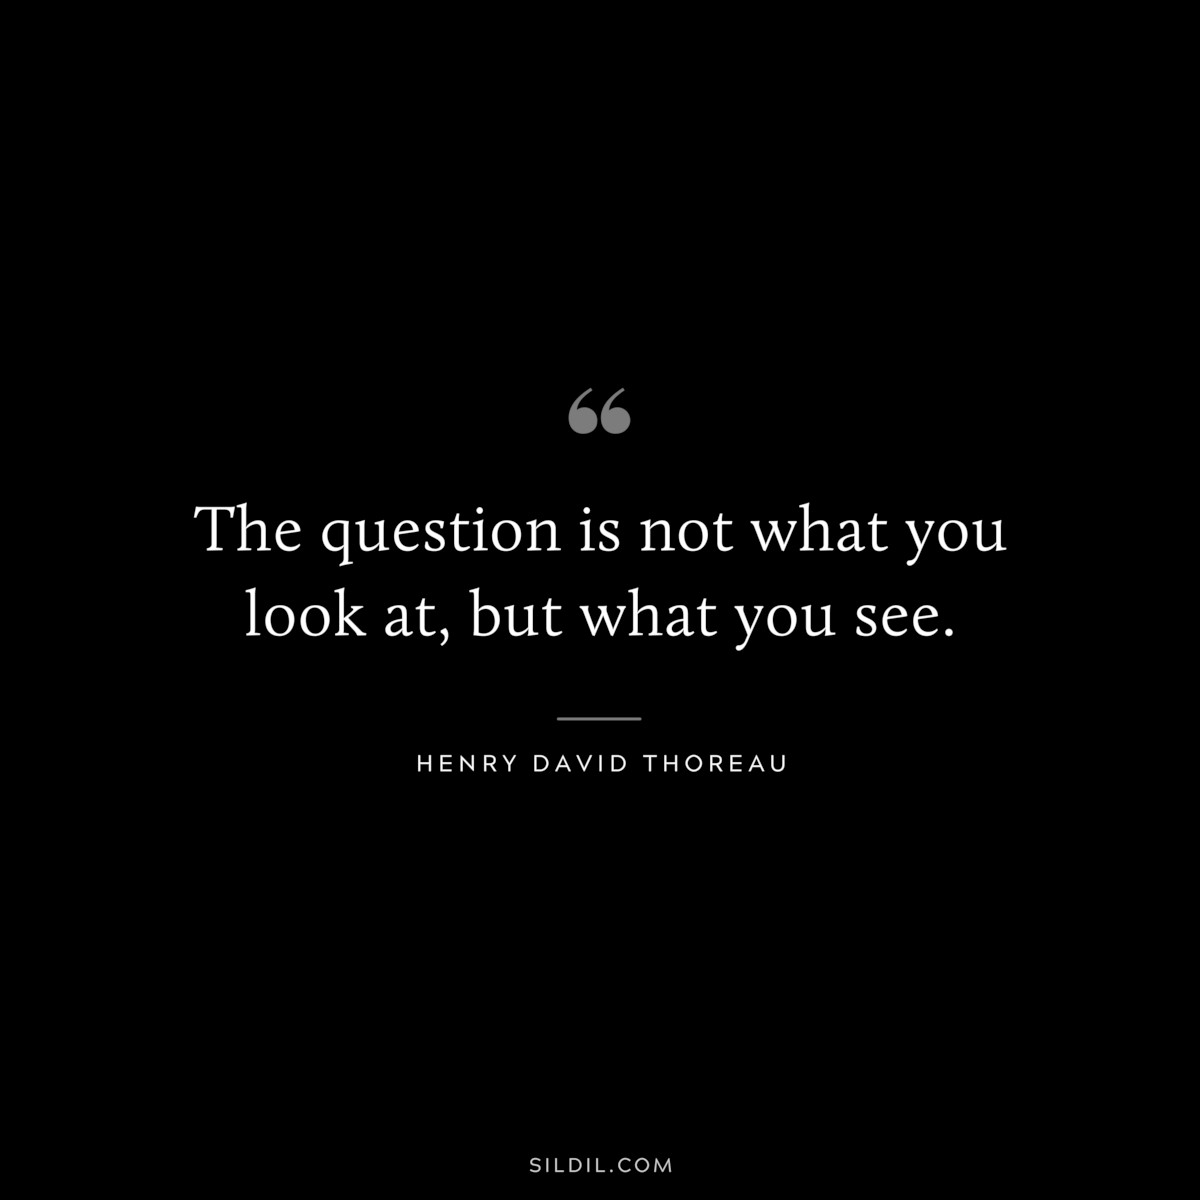 The question is not what you look at, but what you see. — Henry David Thoreau